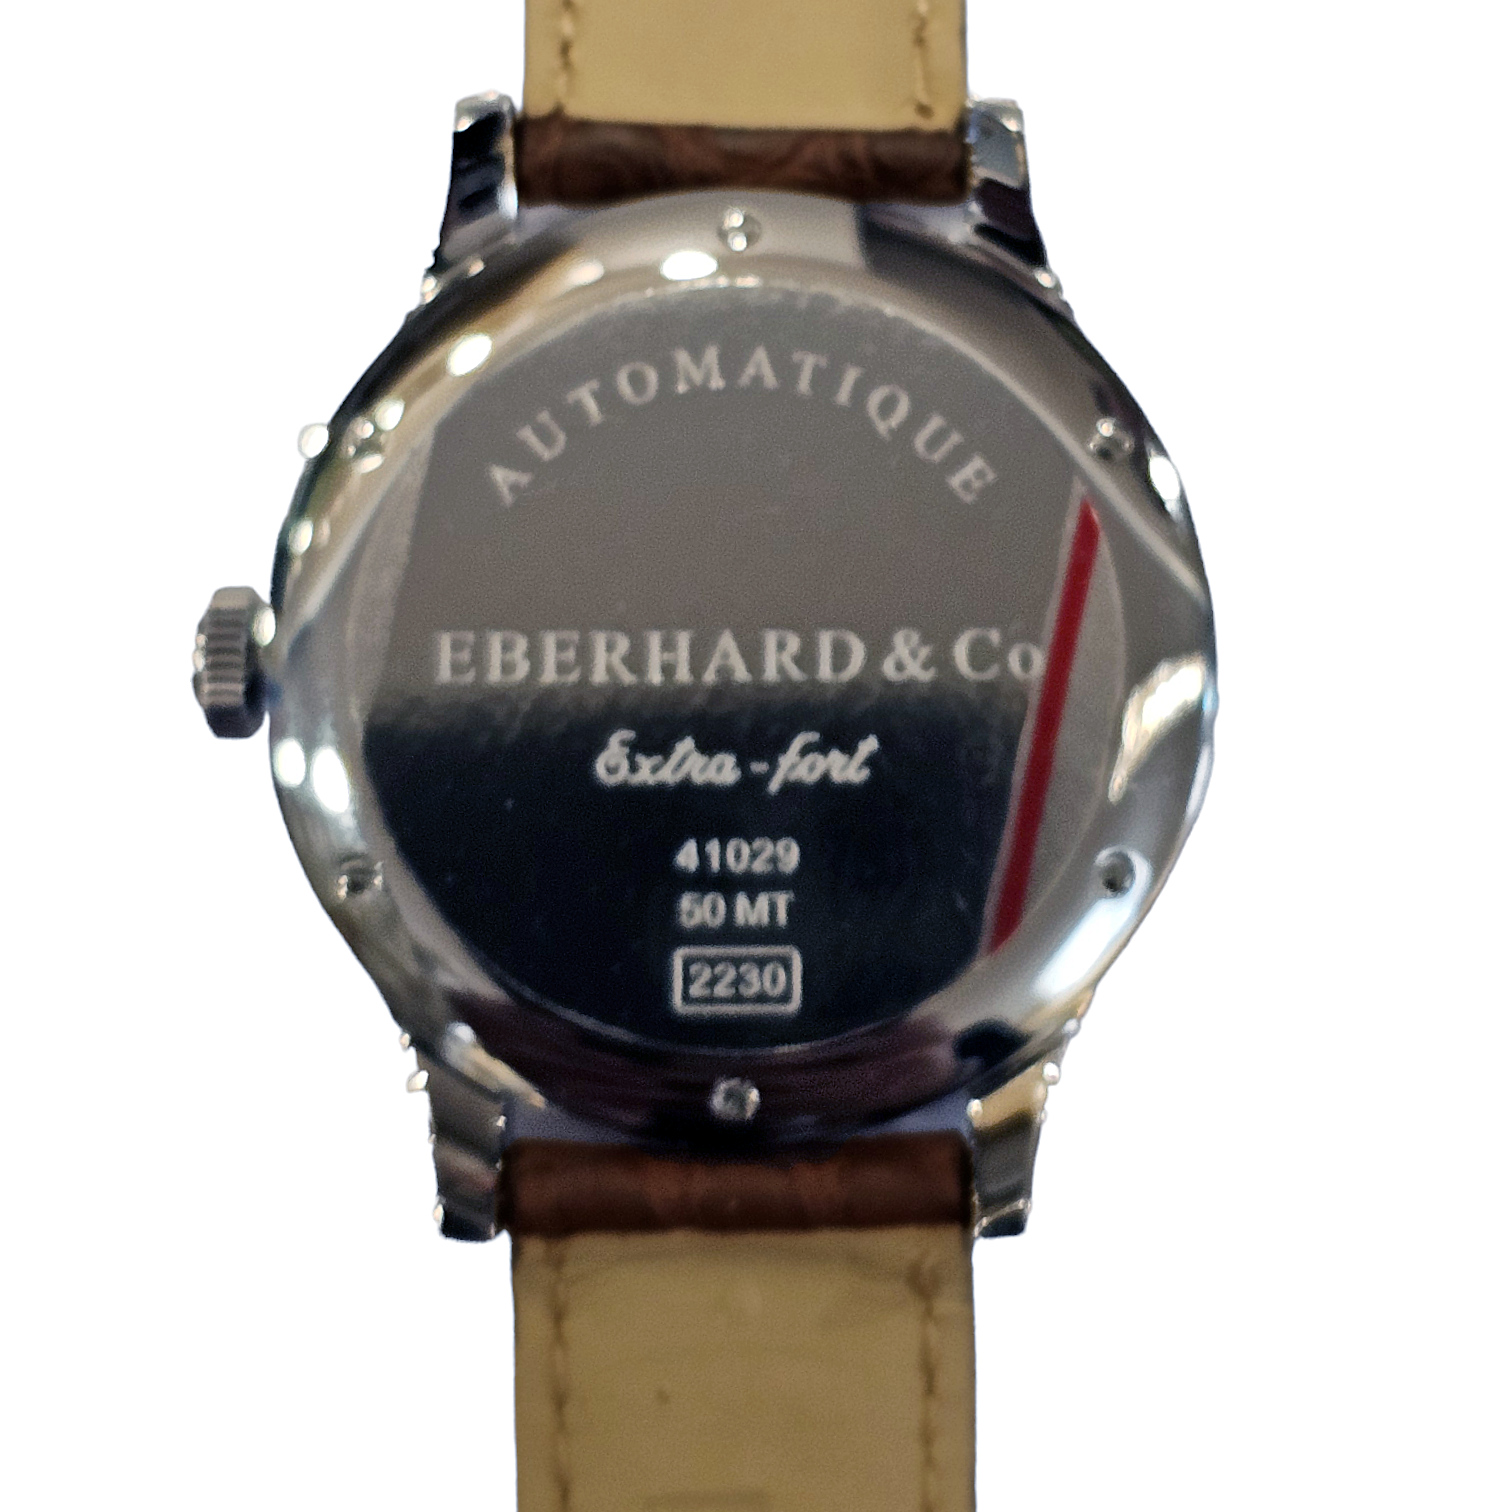 Eberhard & Co. Extra-Fort Automatic Ref. 41029CP - ON6055